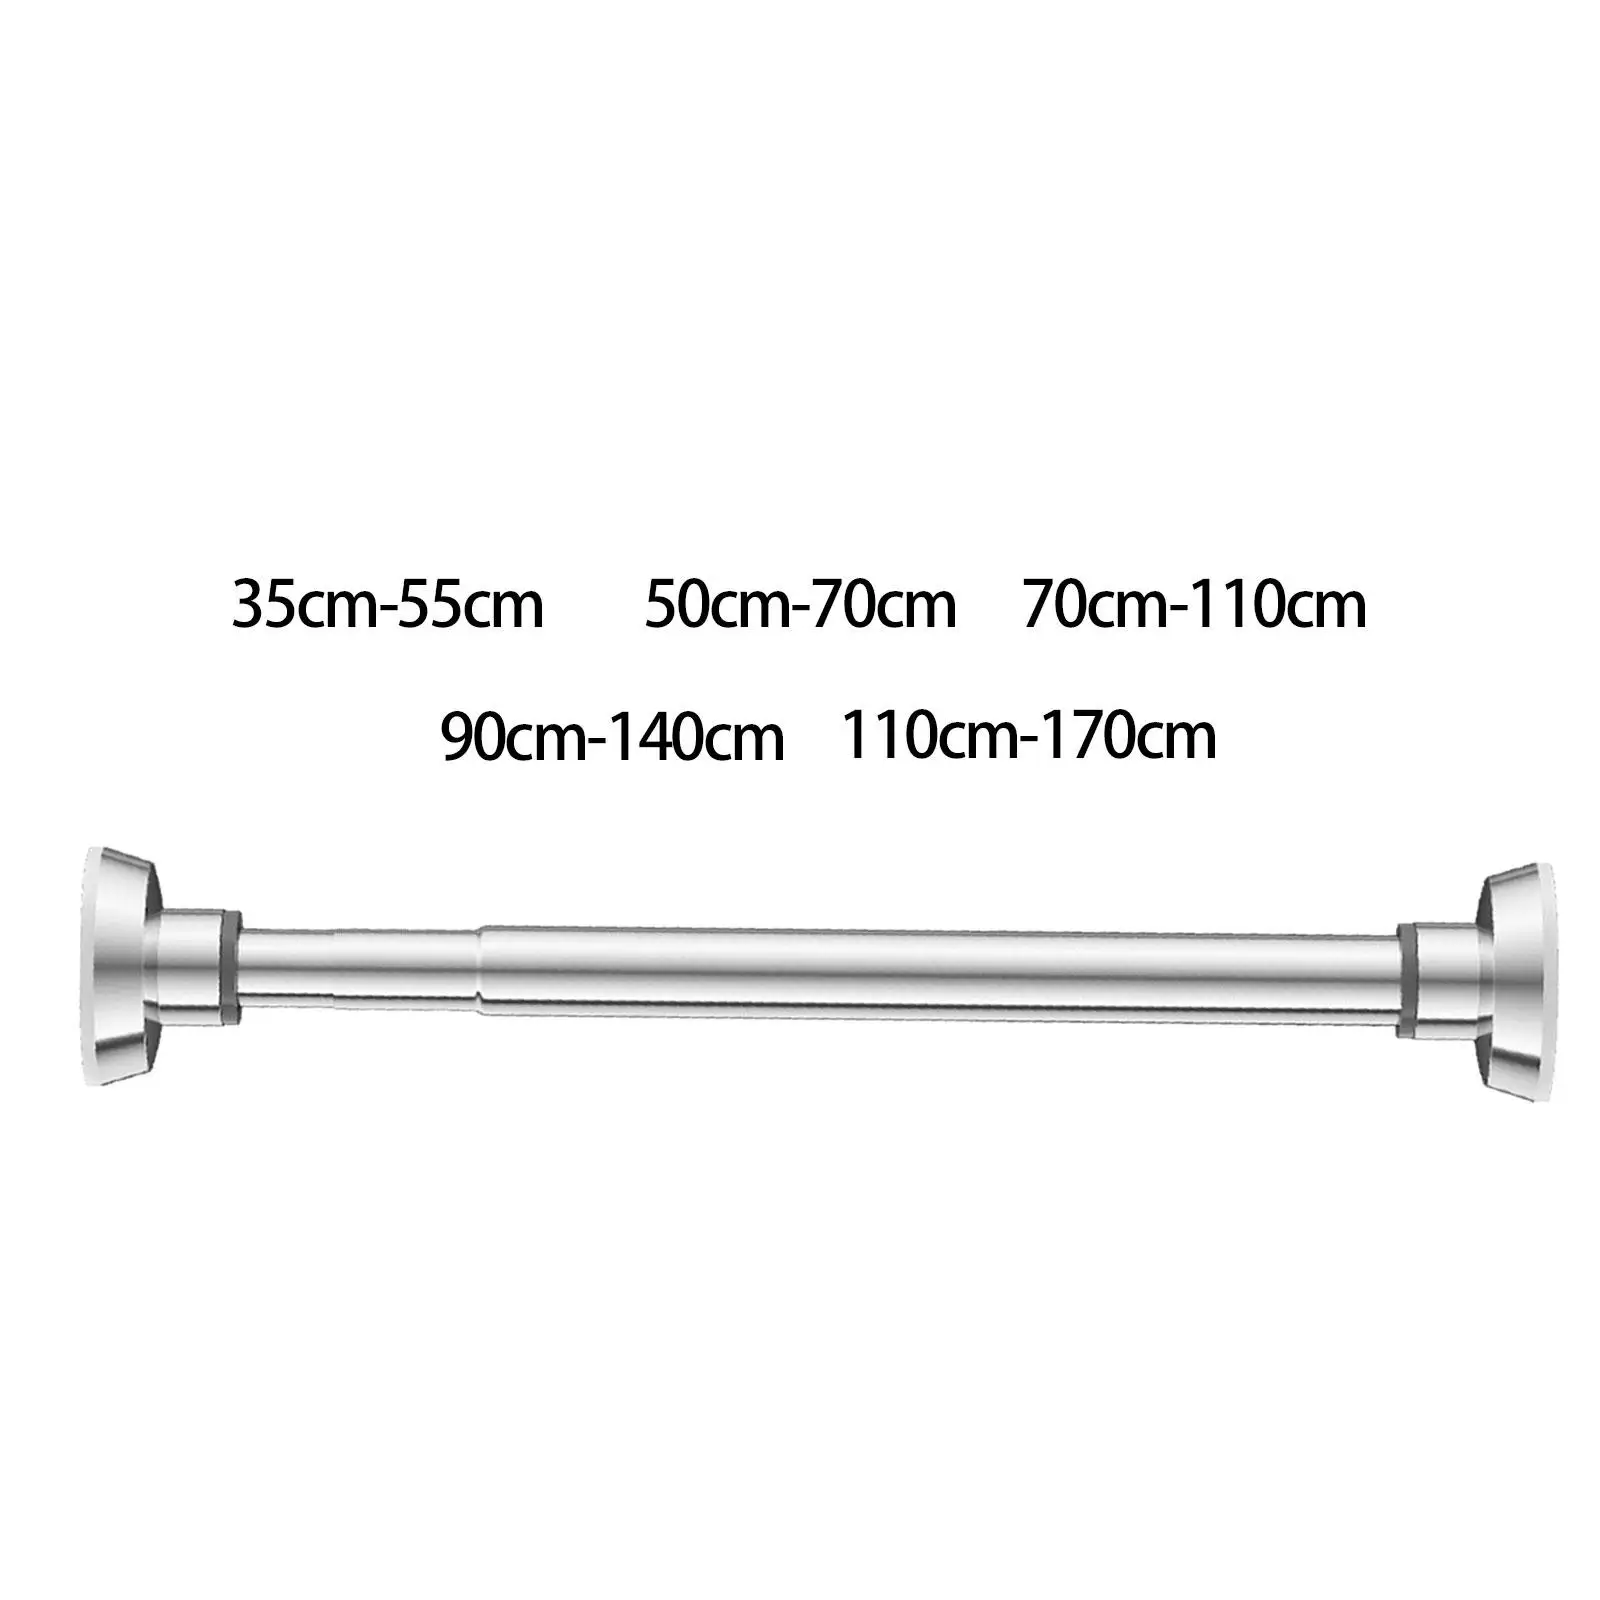 Telescopic Clothing Rod Curtain Rod Clothes Rod for Cabinets Bedroom Home